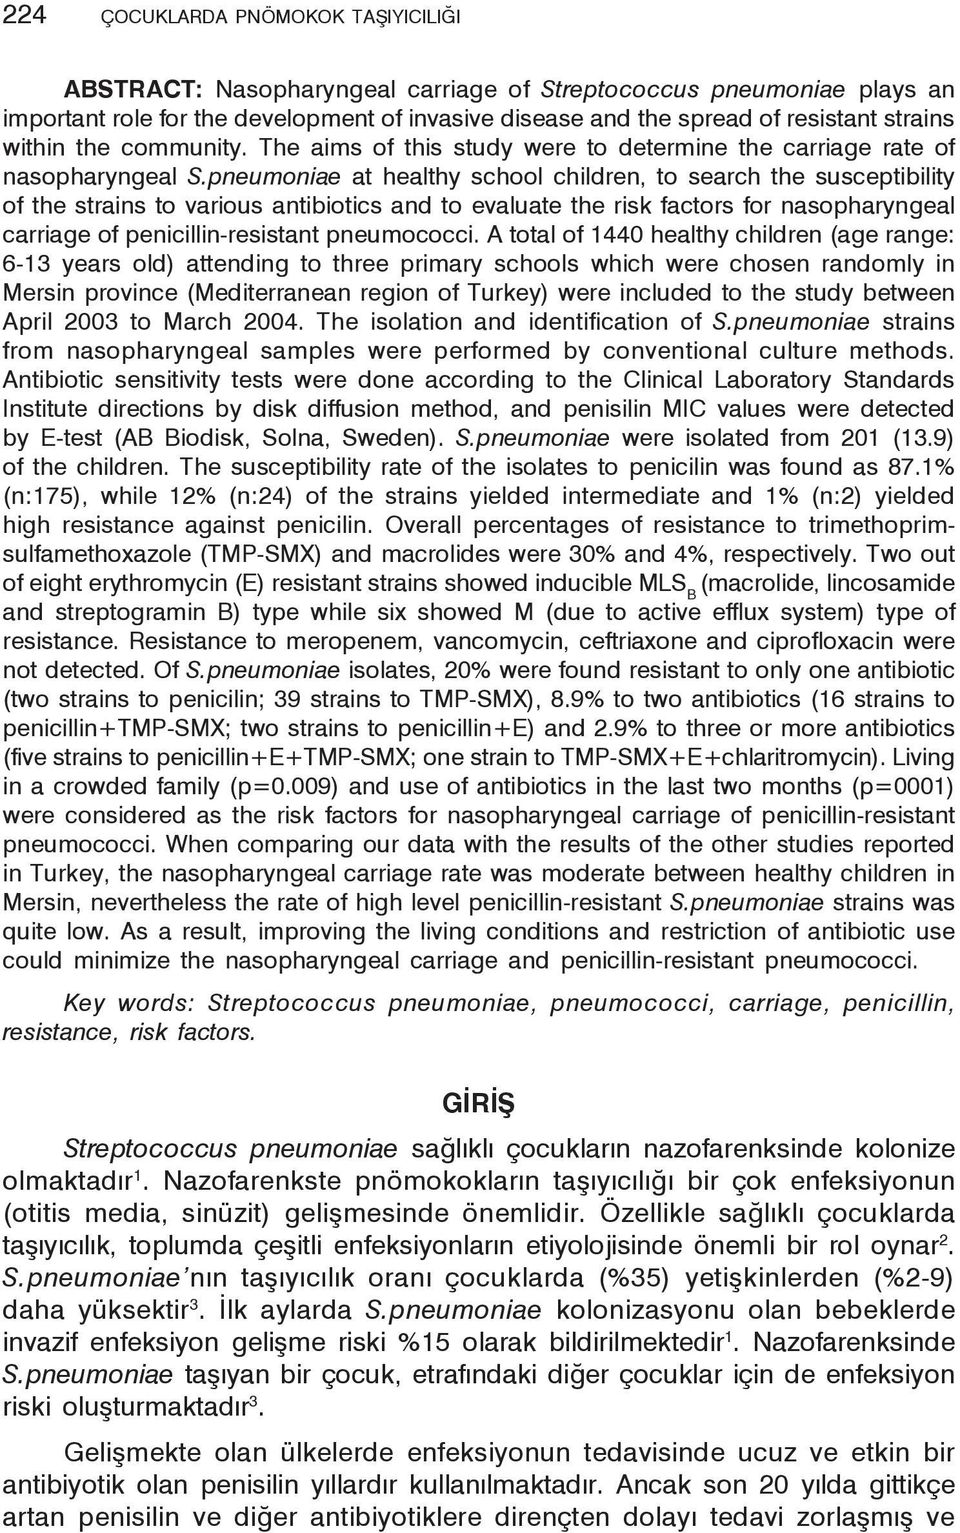 pneumoniae at healthy school children, to search the susceptibility of the strains to various antibiotics and to evaluate the risk factors for nasopharyngeal carriage of penicillin-resistant